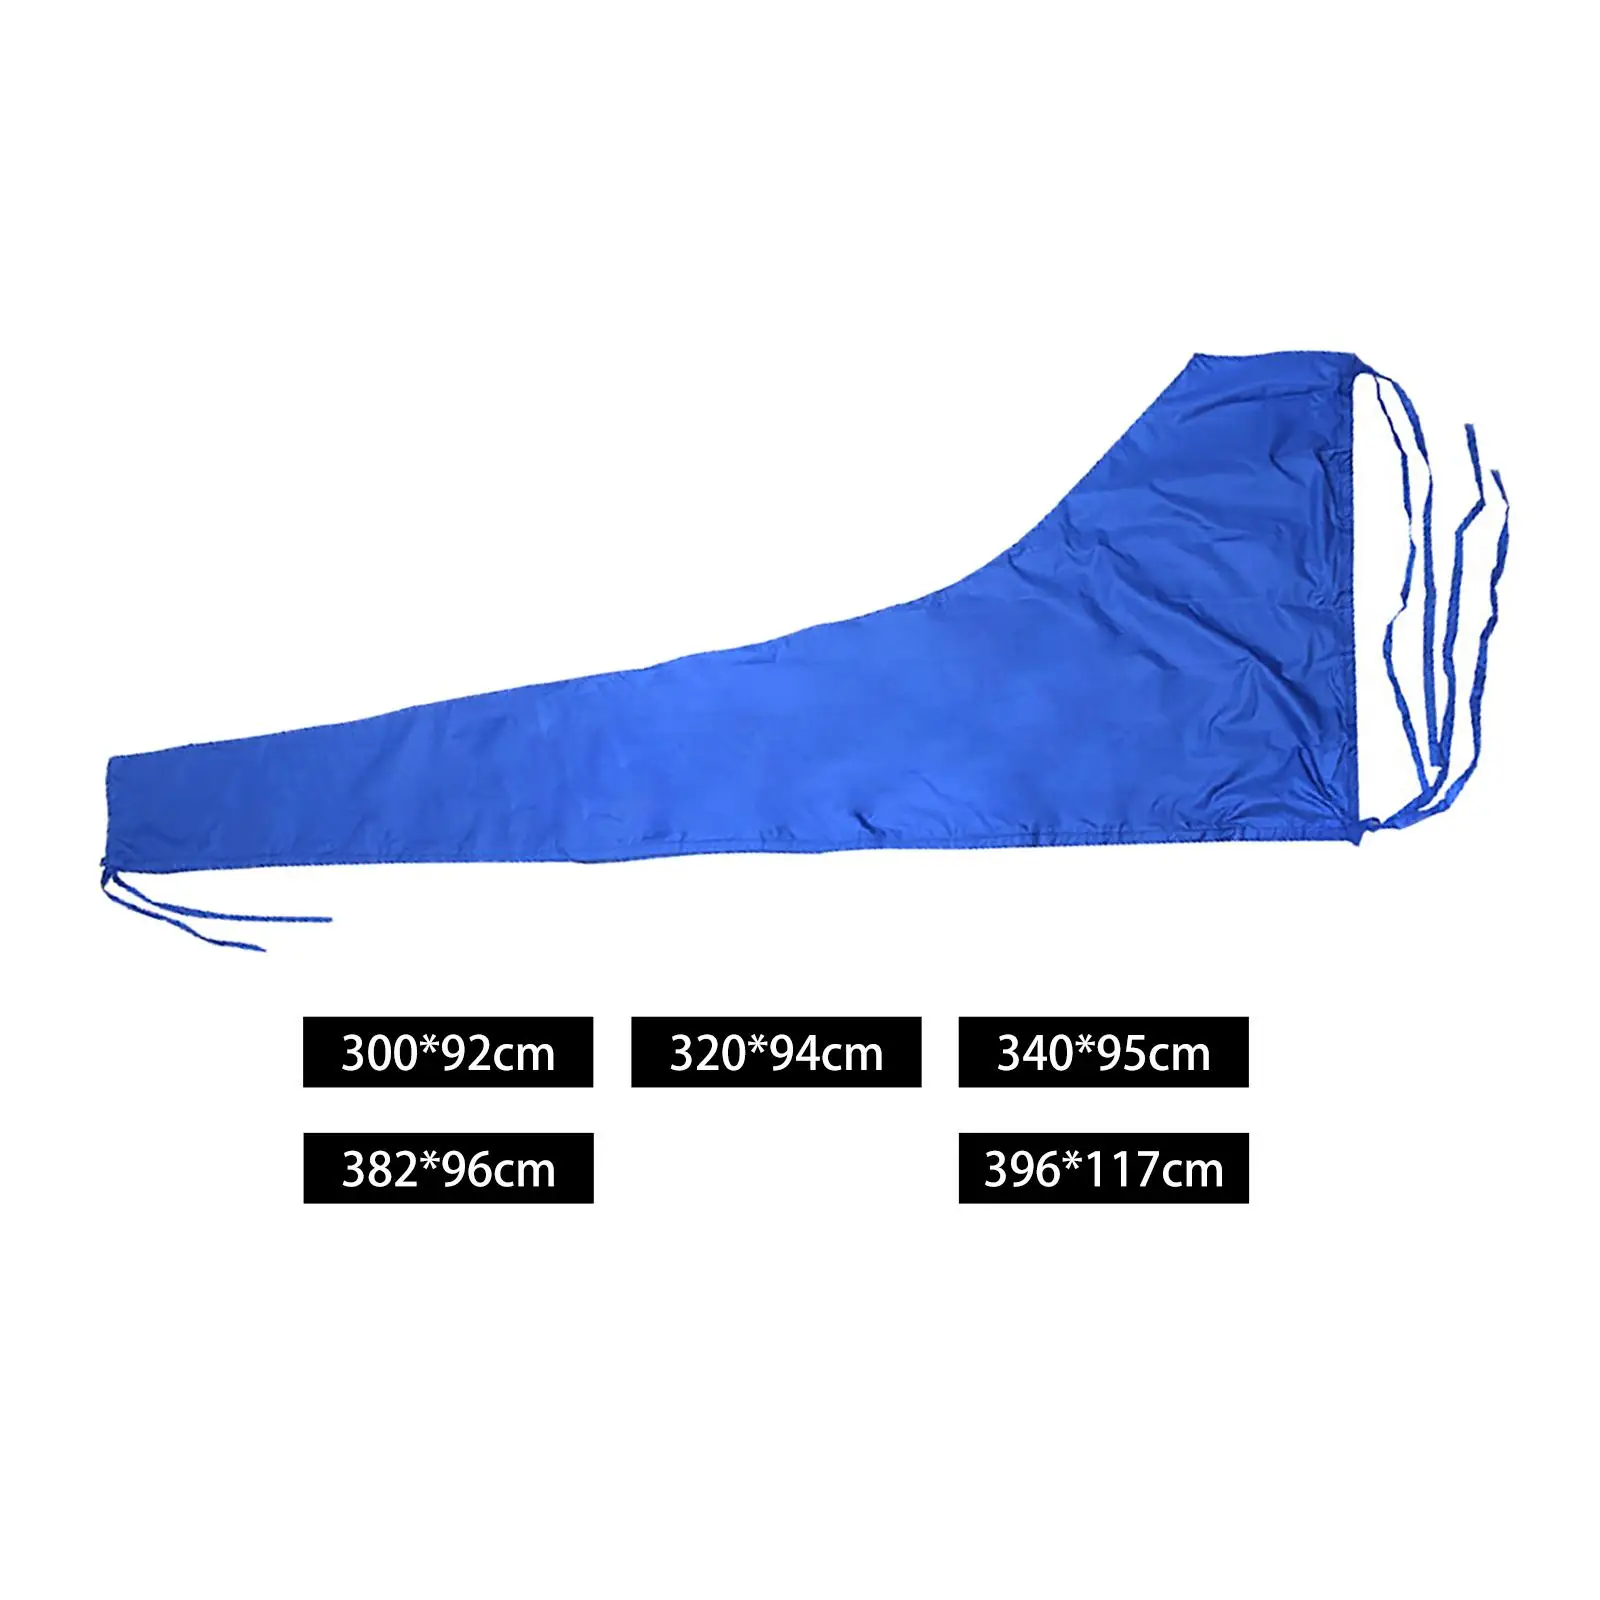 Mainsail Boom Cover Windproof Boat Accessories Sail Cover Dustproof Cover